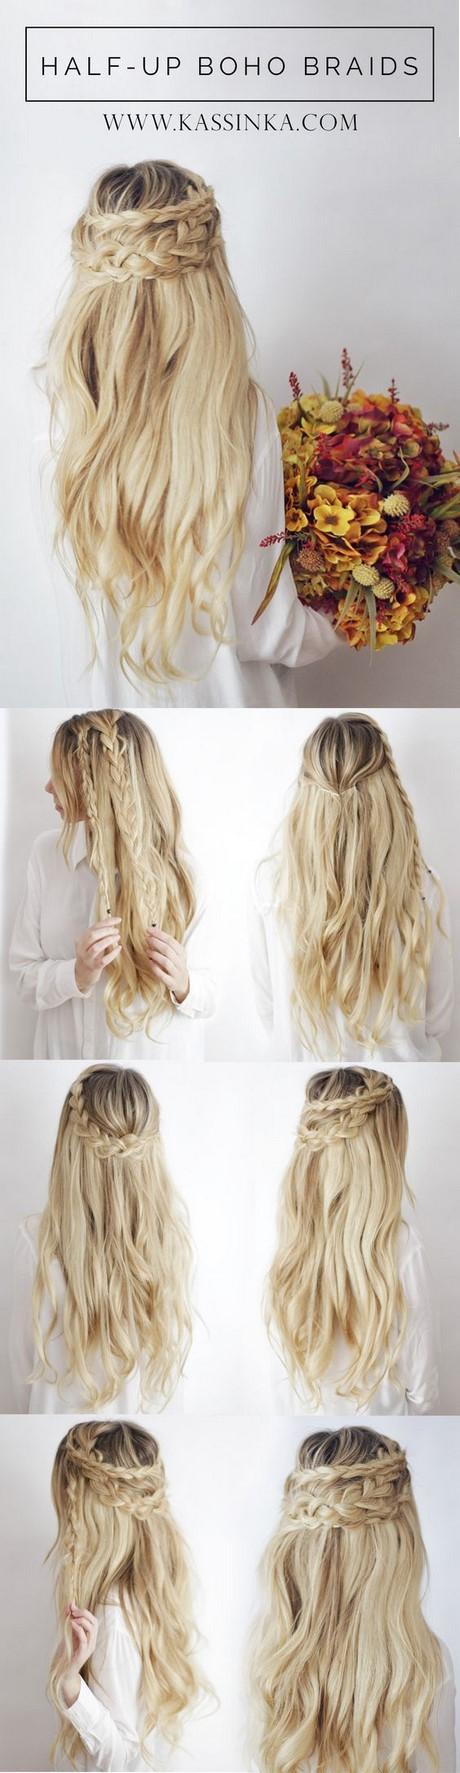 Ideas for braided hairstyles ideas-for-braided-hairstyles-42_10